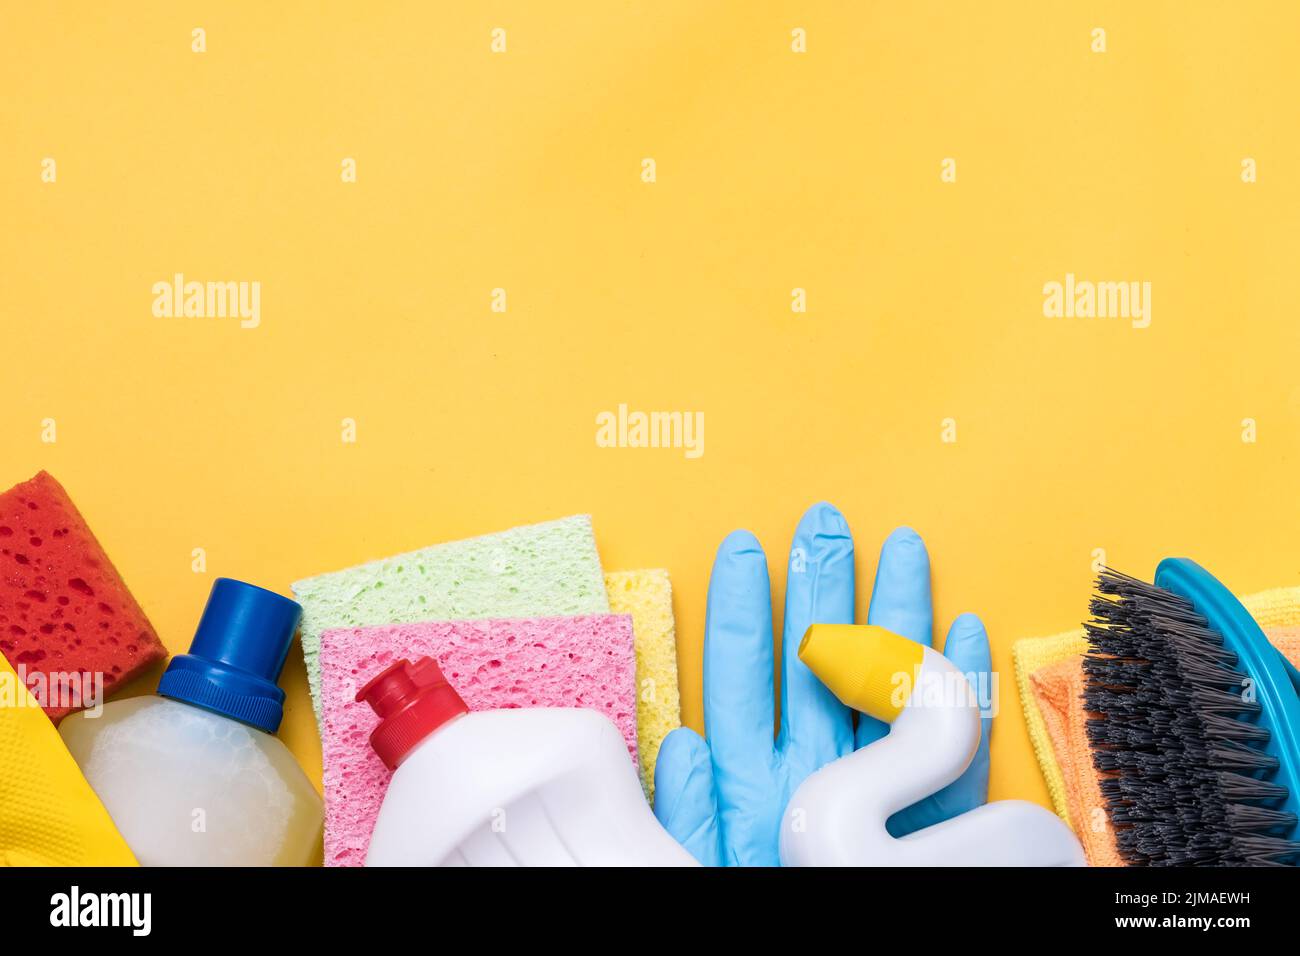 home cleaning products supplies variety Stock Photo